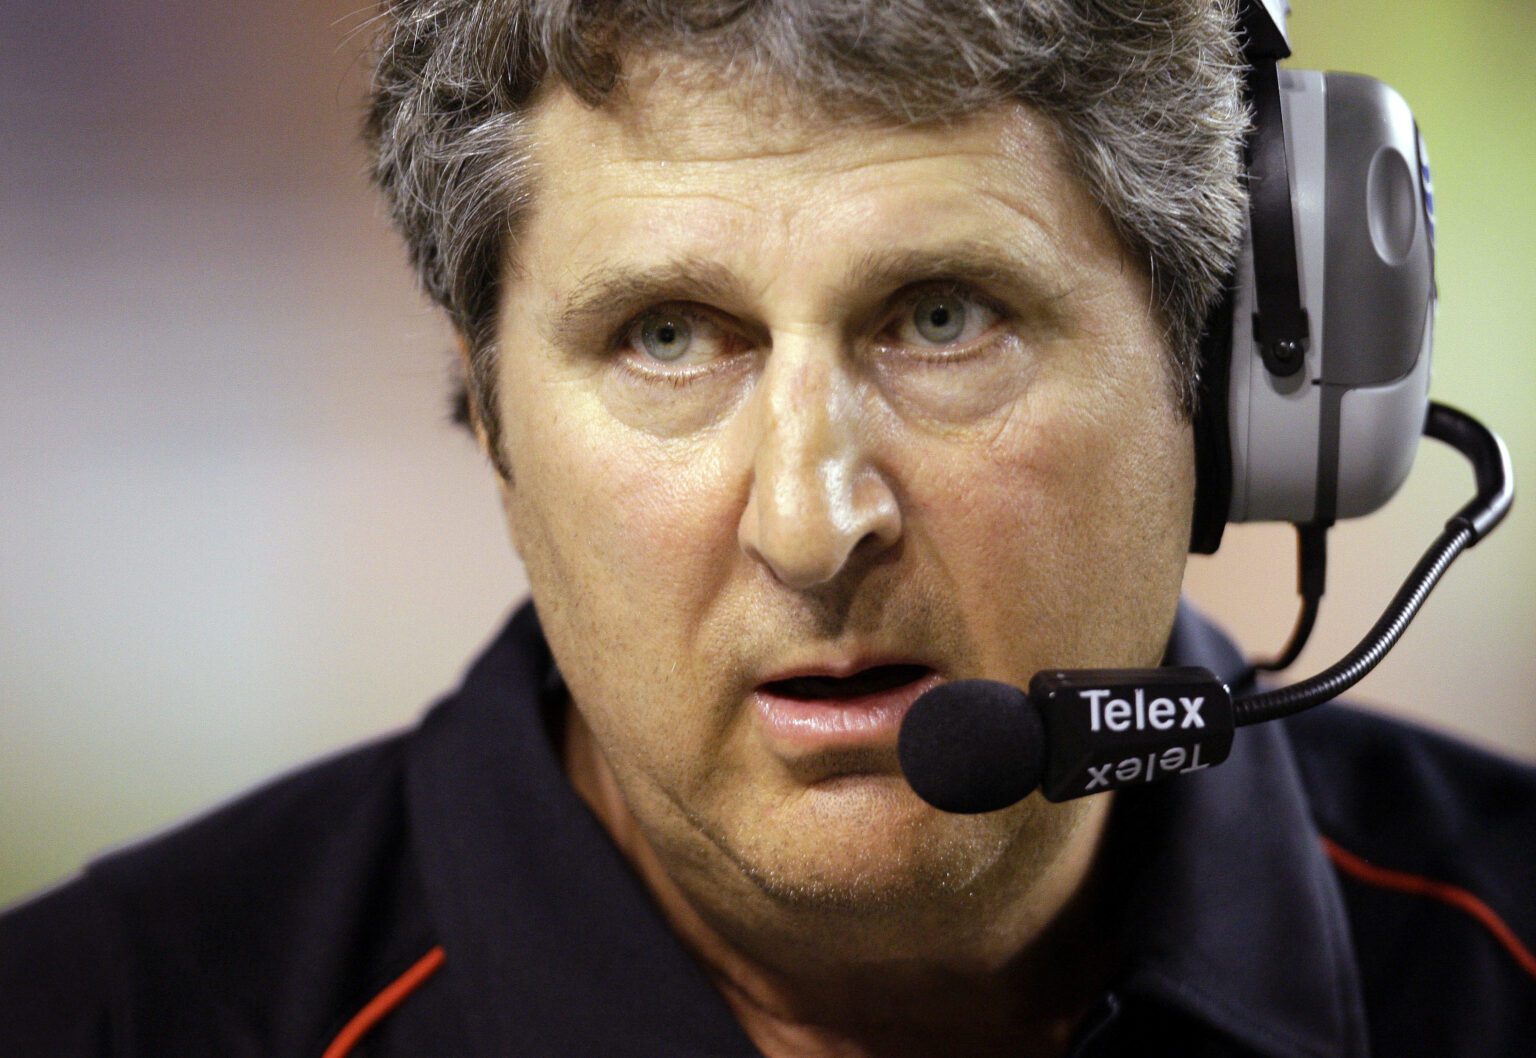 Texas Tech coach Mike Leach waits as a play is reviewed during the first quarter of their NCAA college football game against Texas in Austin